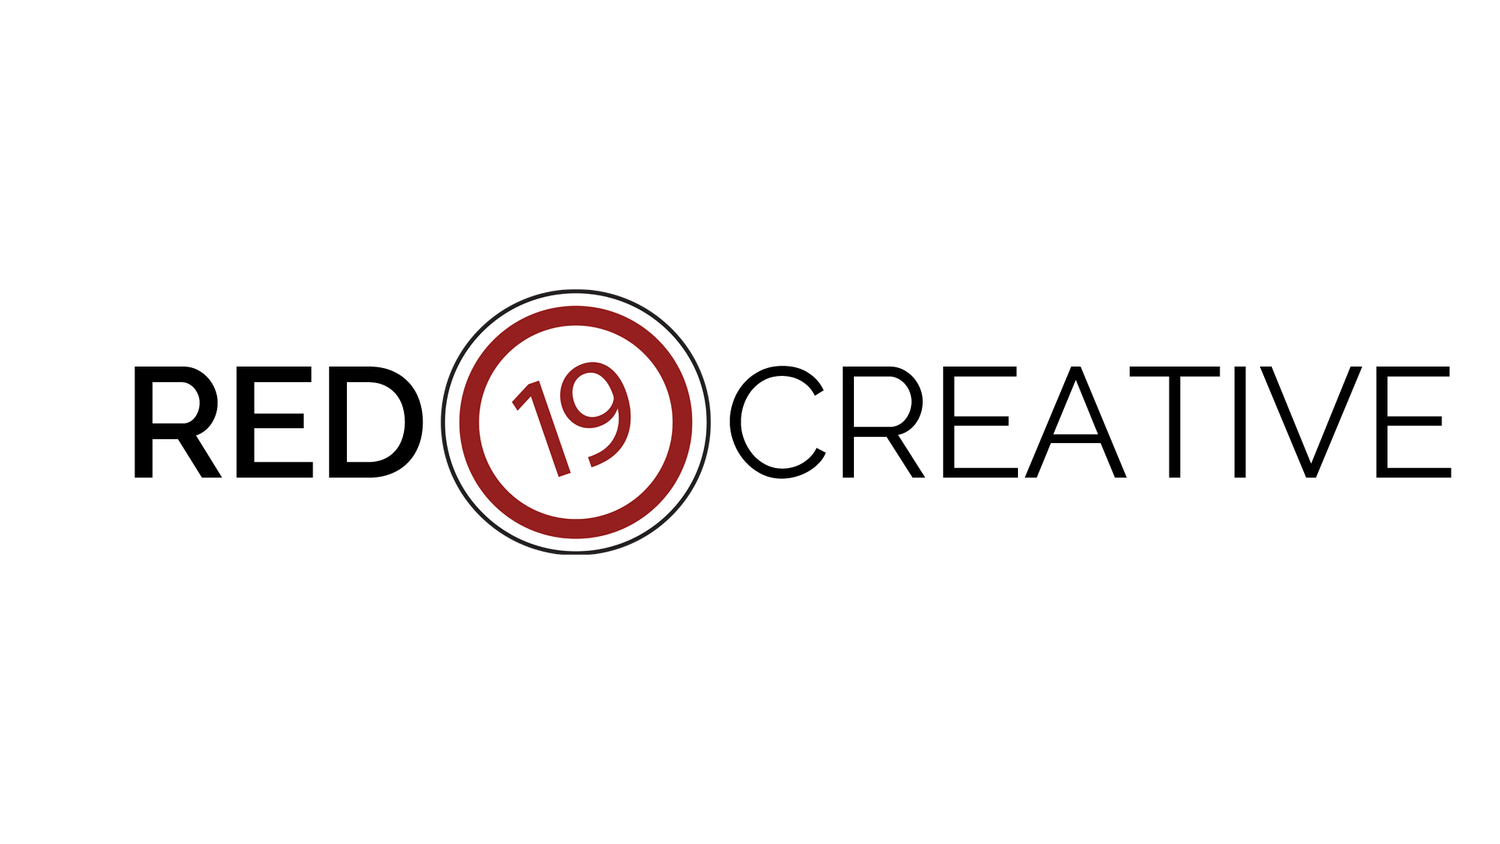 Red 19 Creative